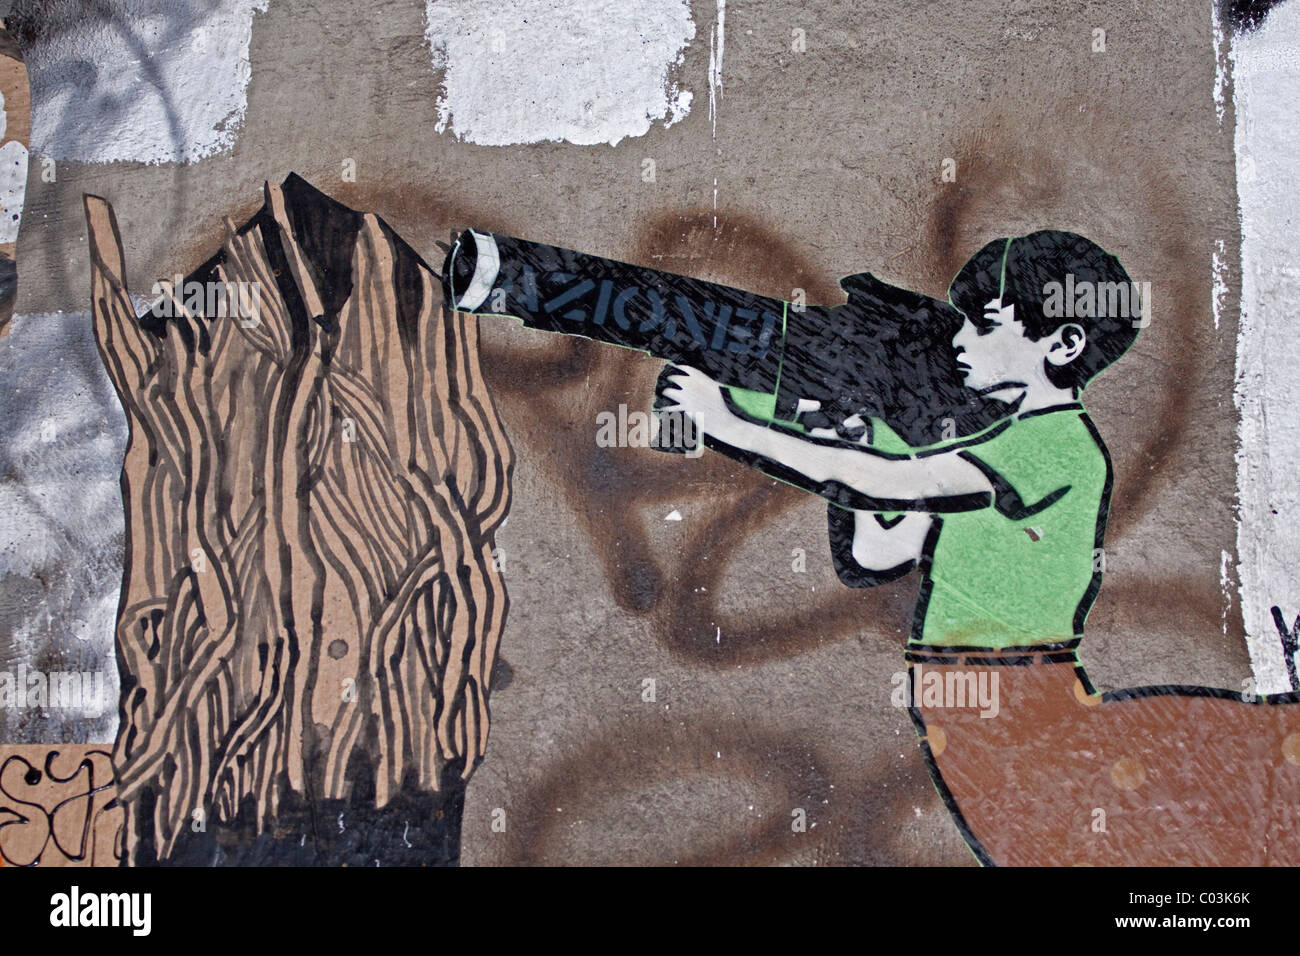 Boy with a bazooka, a symbol of child soldiers, graffiti on a wall in Berlin, Germany, Europe Stock Photo